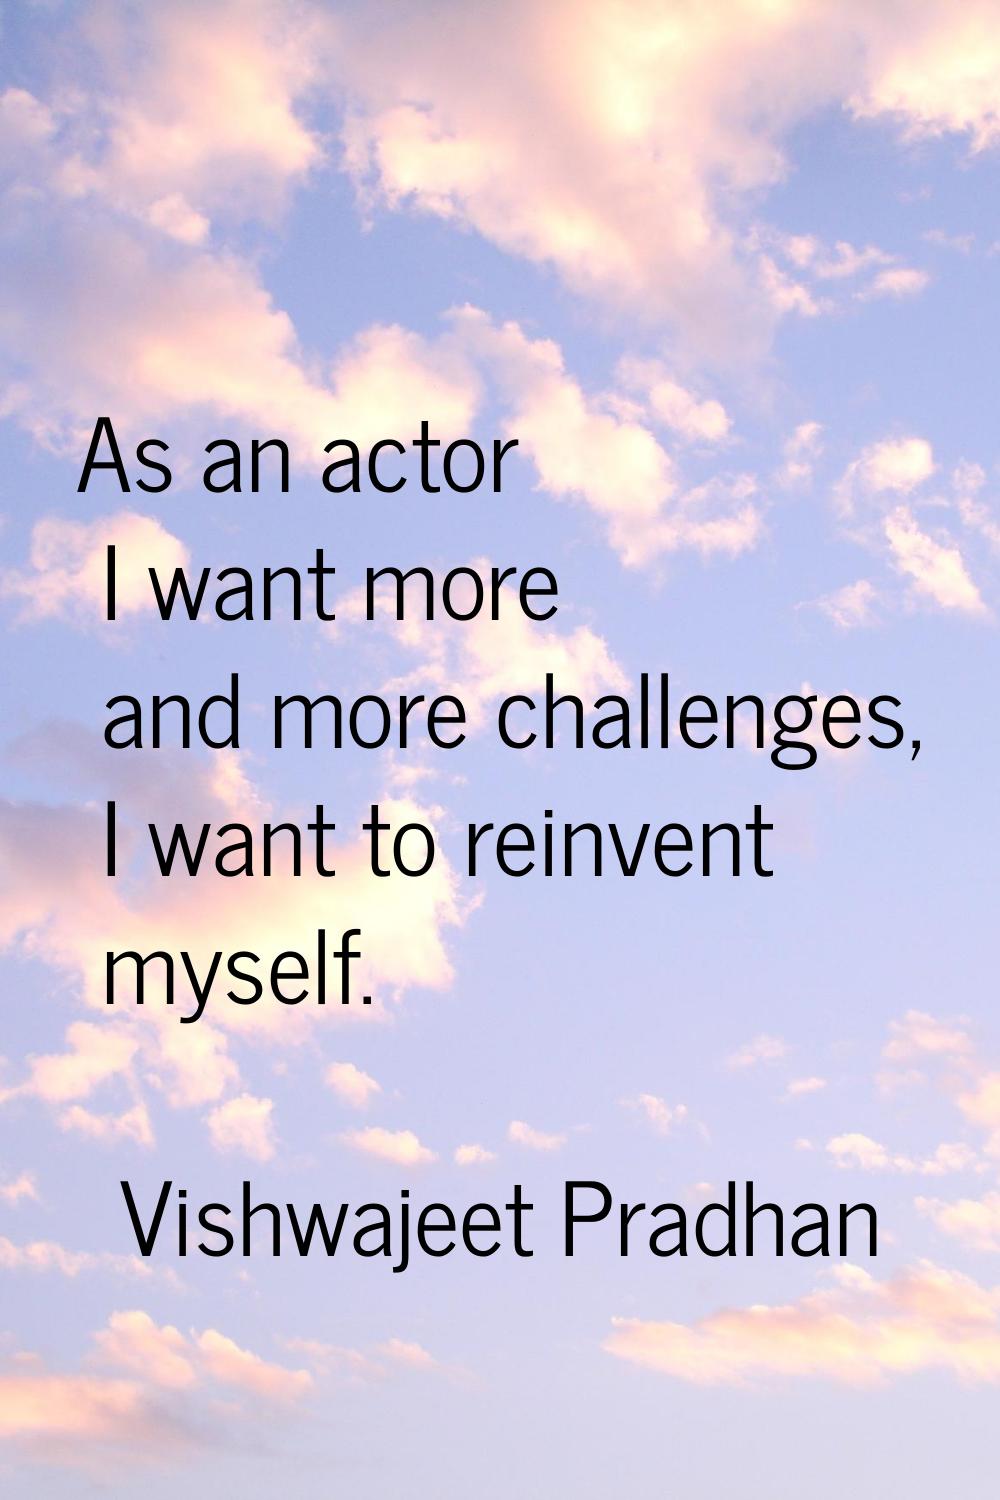 As an actor I want more and more challenges, I want to reinvent myself.